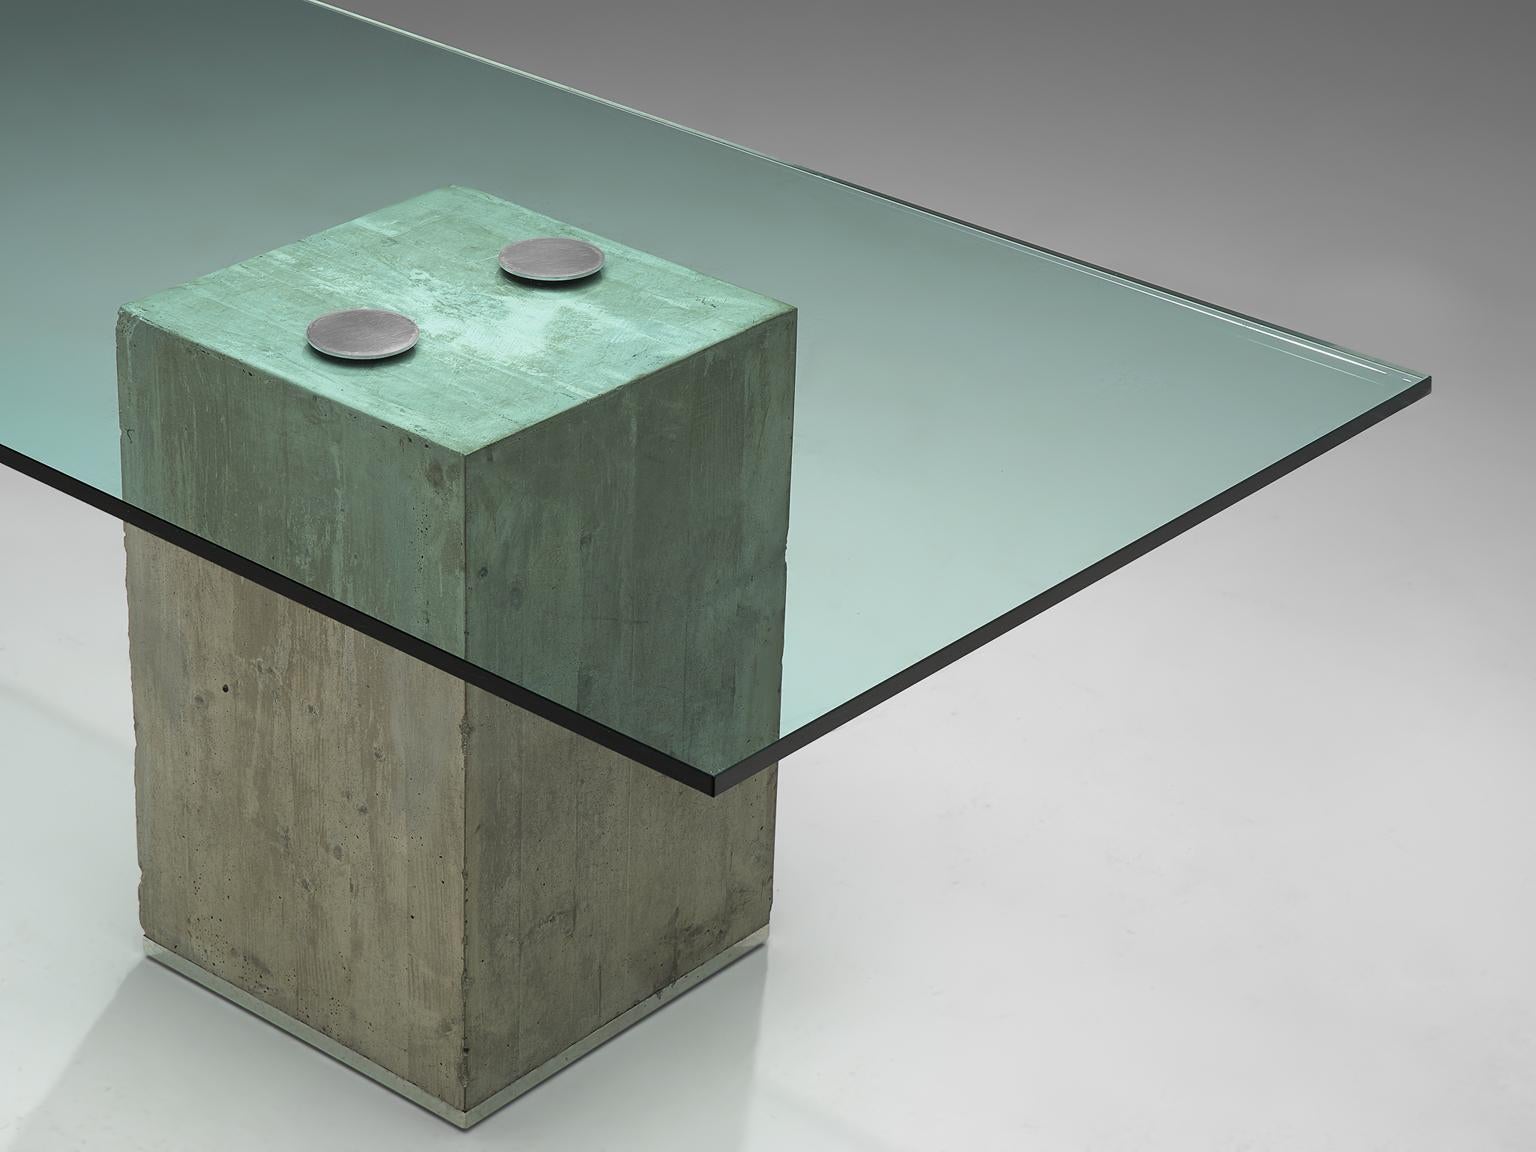 Sergio & Giorgio Saporiti for Saporiti, dining table, glass, concrete and chromed steel, Italy, 1972.

Modern, sculptural dining table designed by Sergio and Giorgio Saporiti. This table called model Sapo is made of a solid concrete base with a